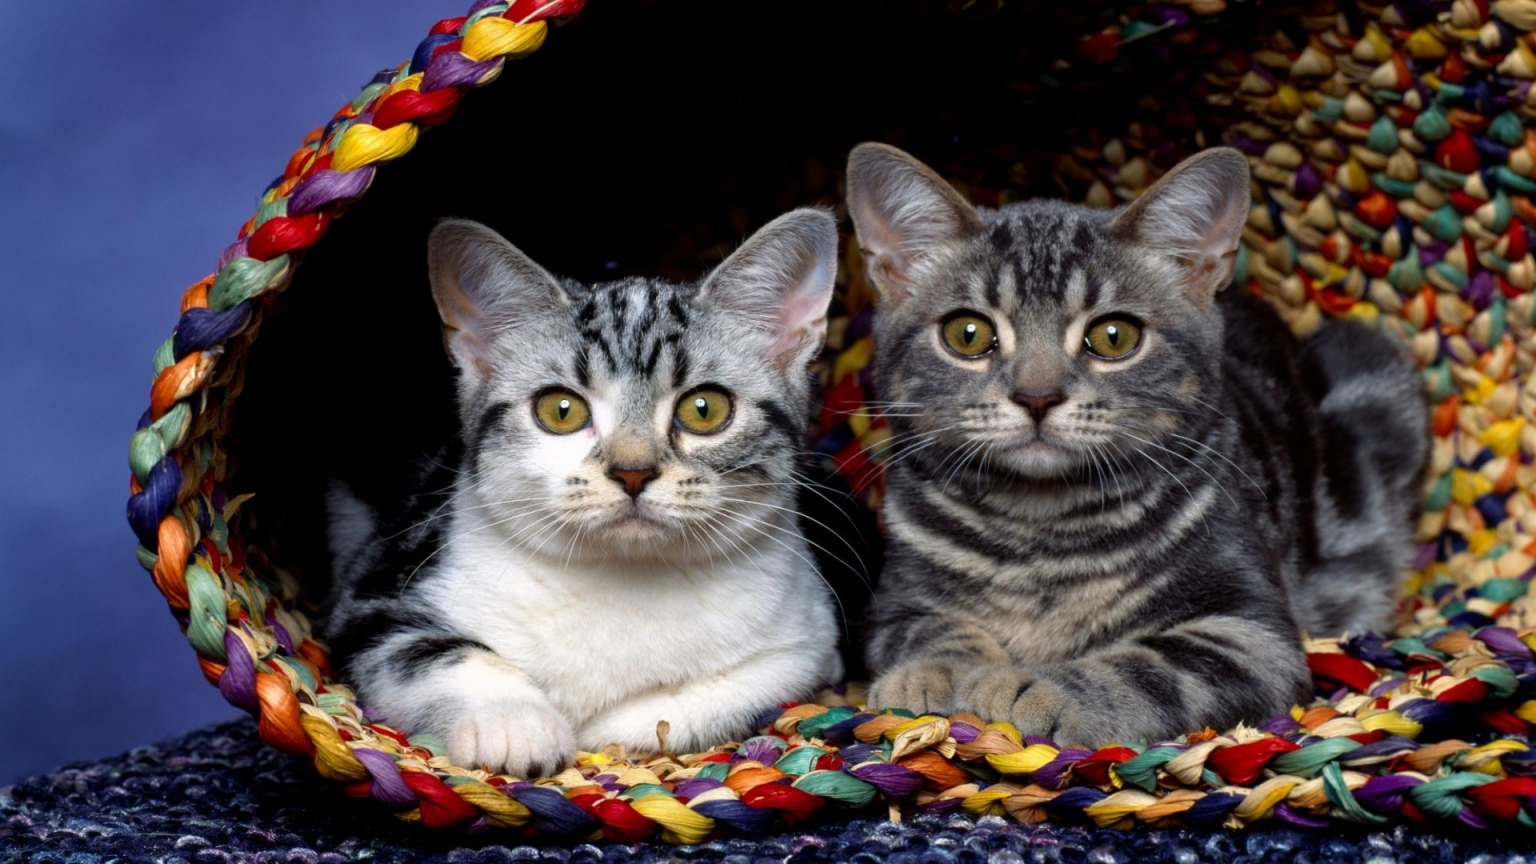 Cats in basket for 1536 x 864 HDTV resolution